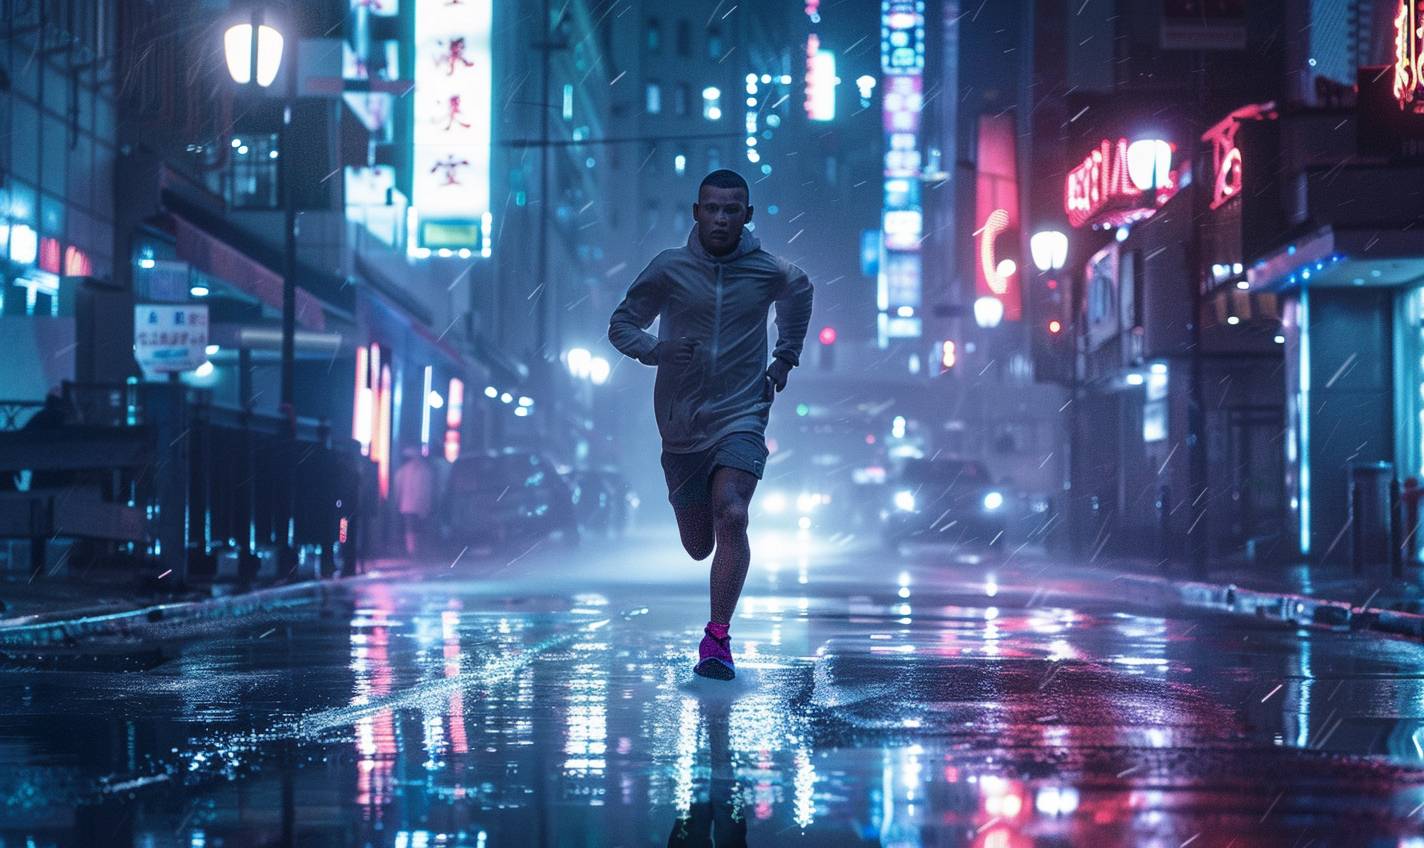 A man running through a rain-soaked city street at night, illuminated by neon lights reflecting off the wet pavement, with an intense expression of determination.